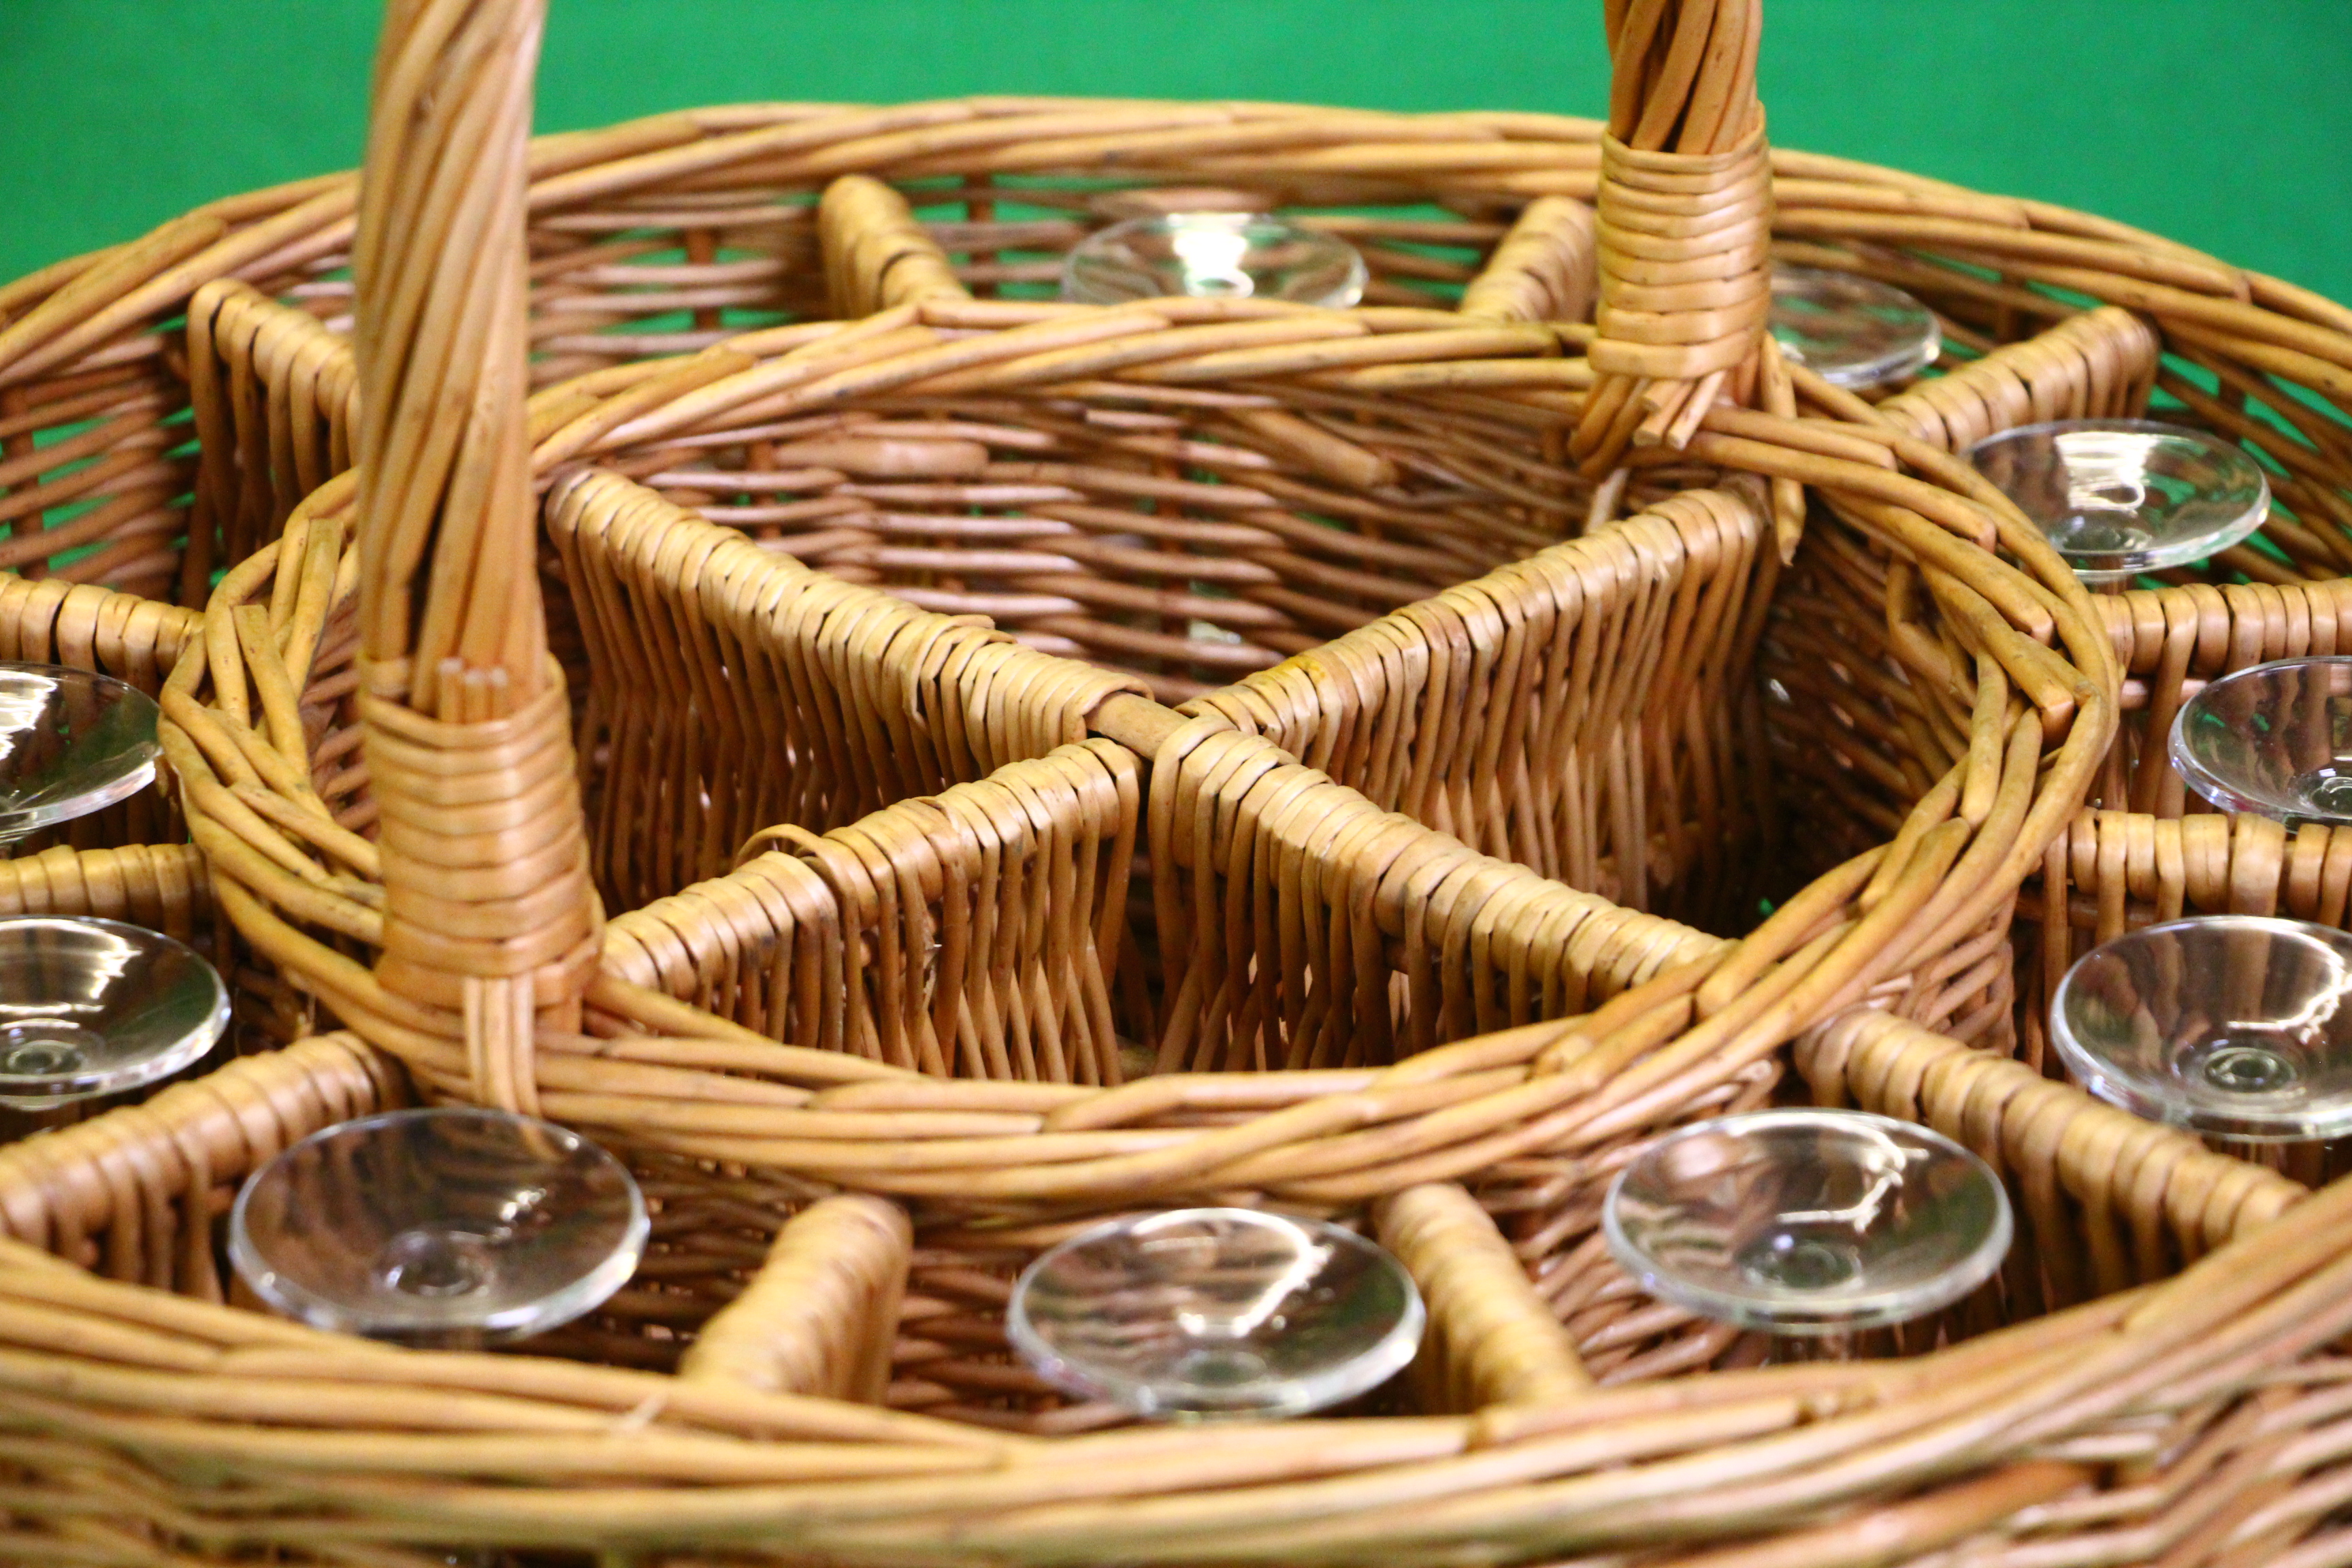 A WICKER CIRCULAR 12 GLASS BOTTLE HAMPER WITH 10 GLASSES AND 2 BOXES OF 6 AS NEW GLASSES - Image 2 of 5